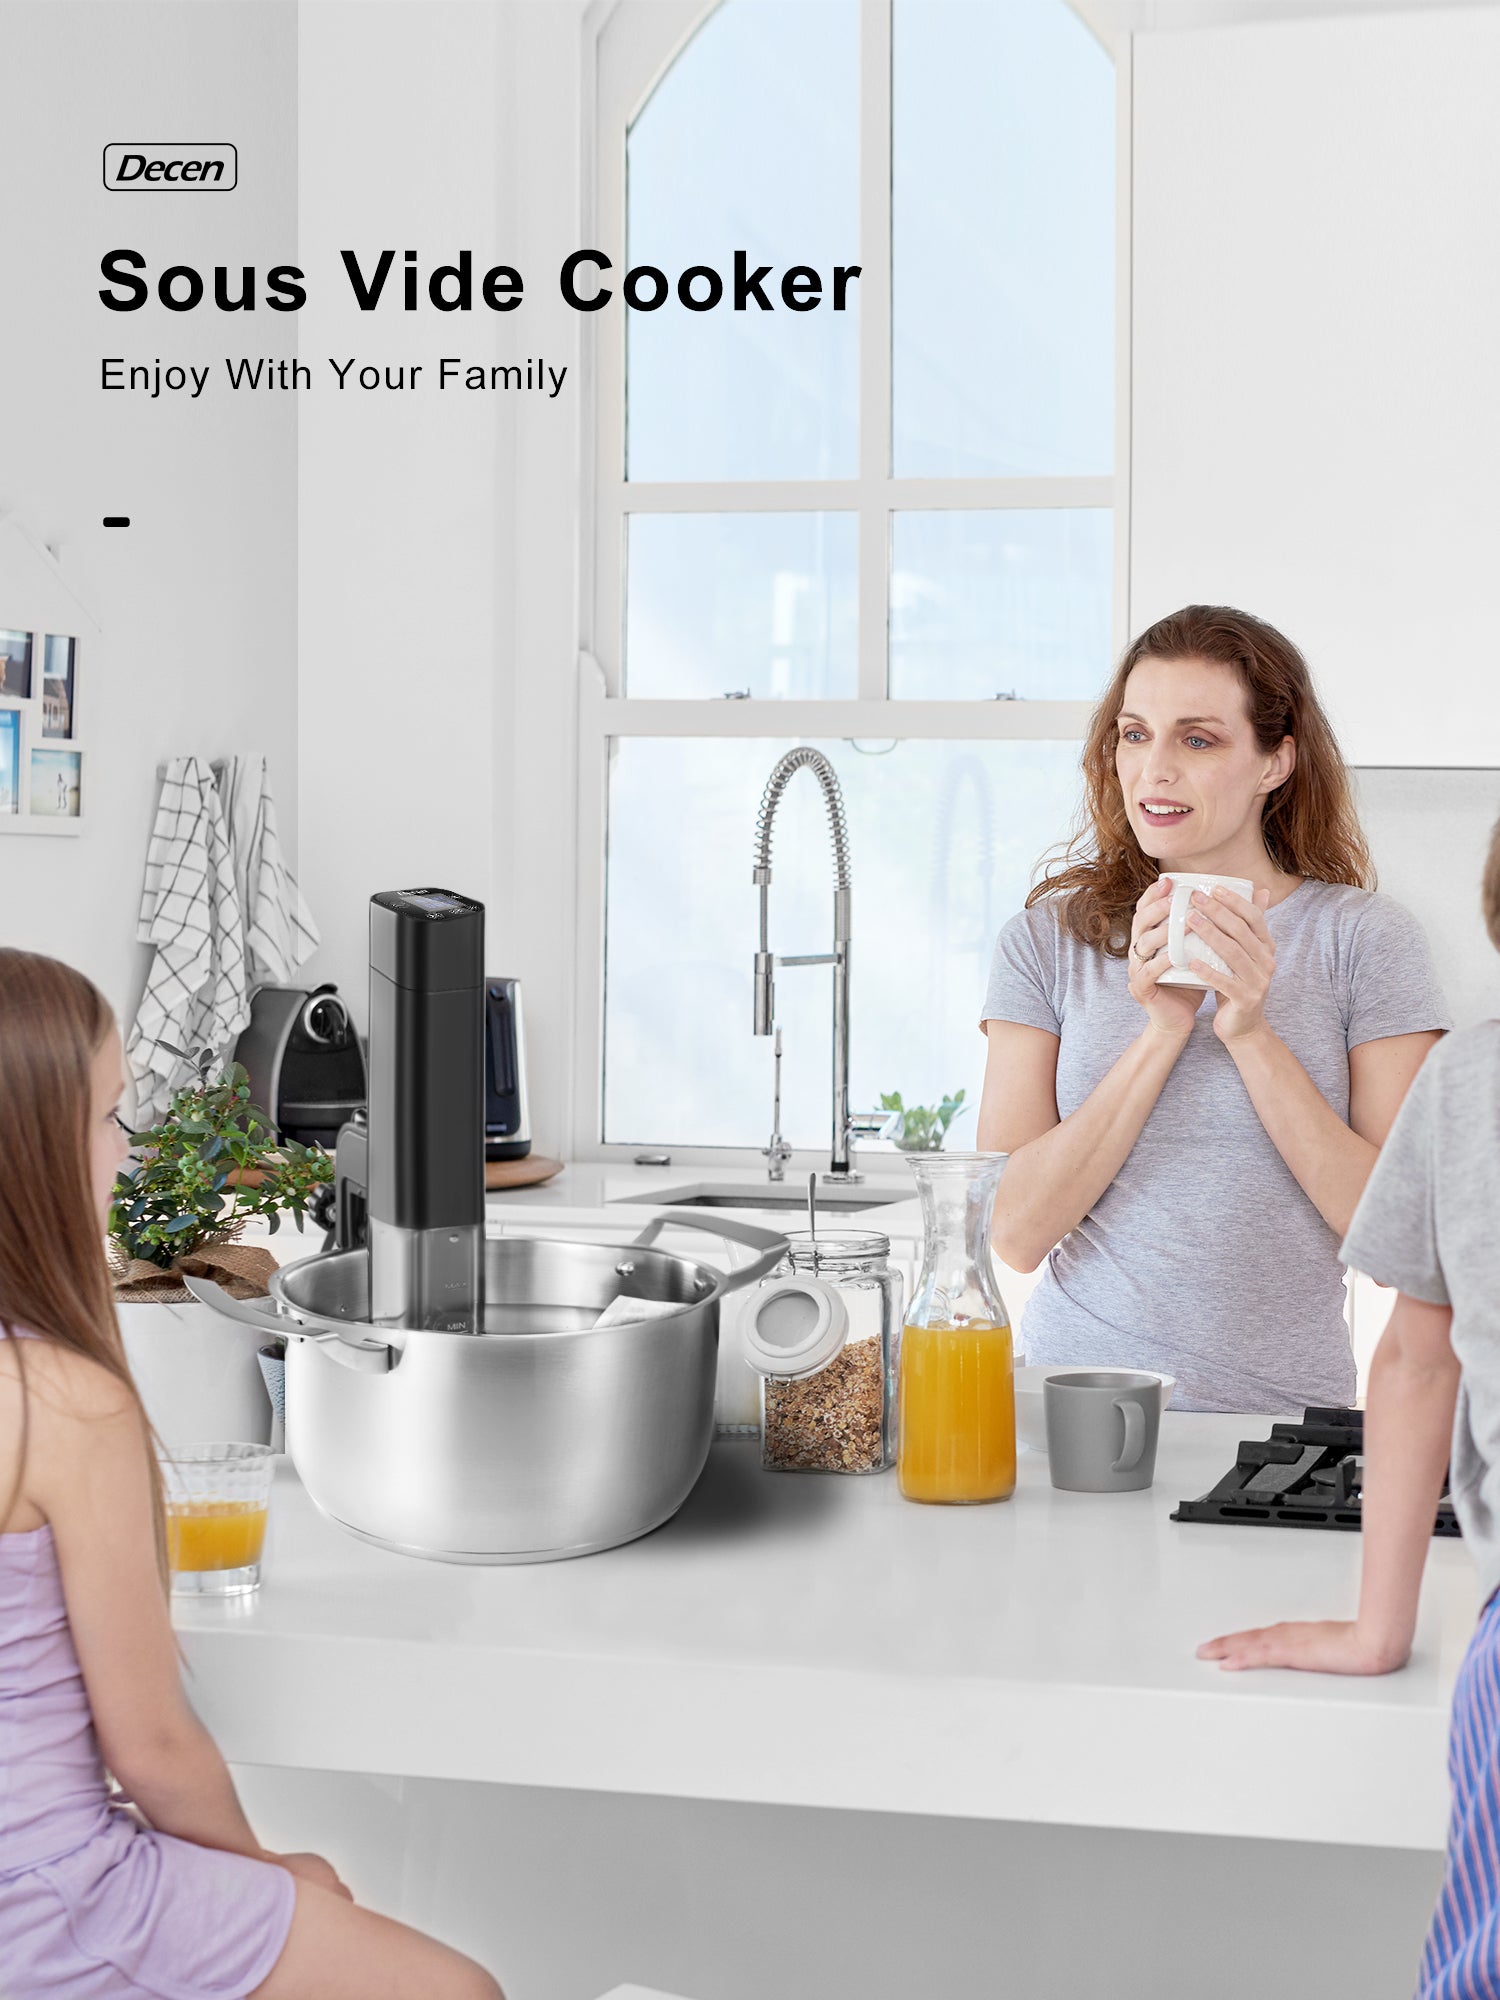 Decen | Sous Vide Cooker Precision Cooker, WiFi Immersion Circulator IPX7 Waterproof Sous Vide Machine with Temperature Control, Timer, Digital Touchscreen Display, Recipe for Kitchen, Smart APP, 800 W